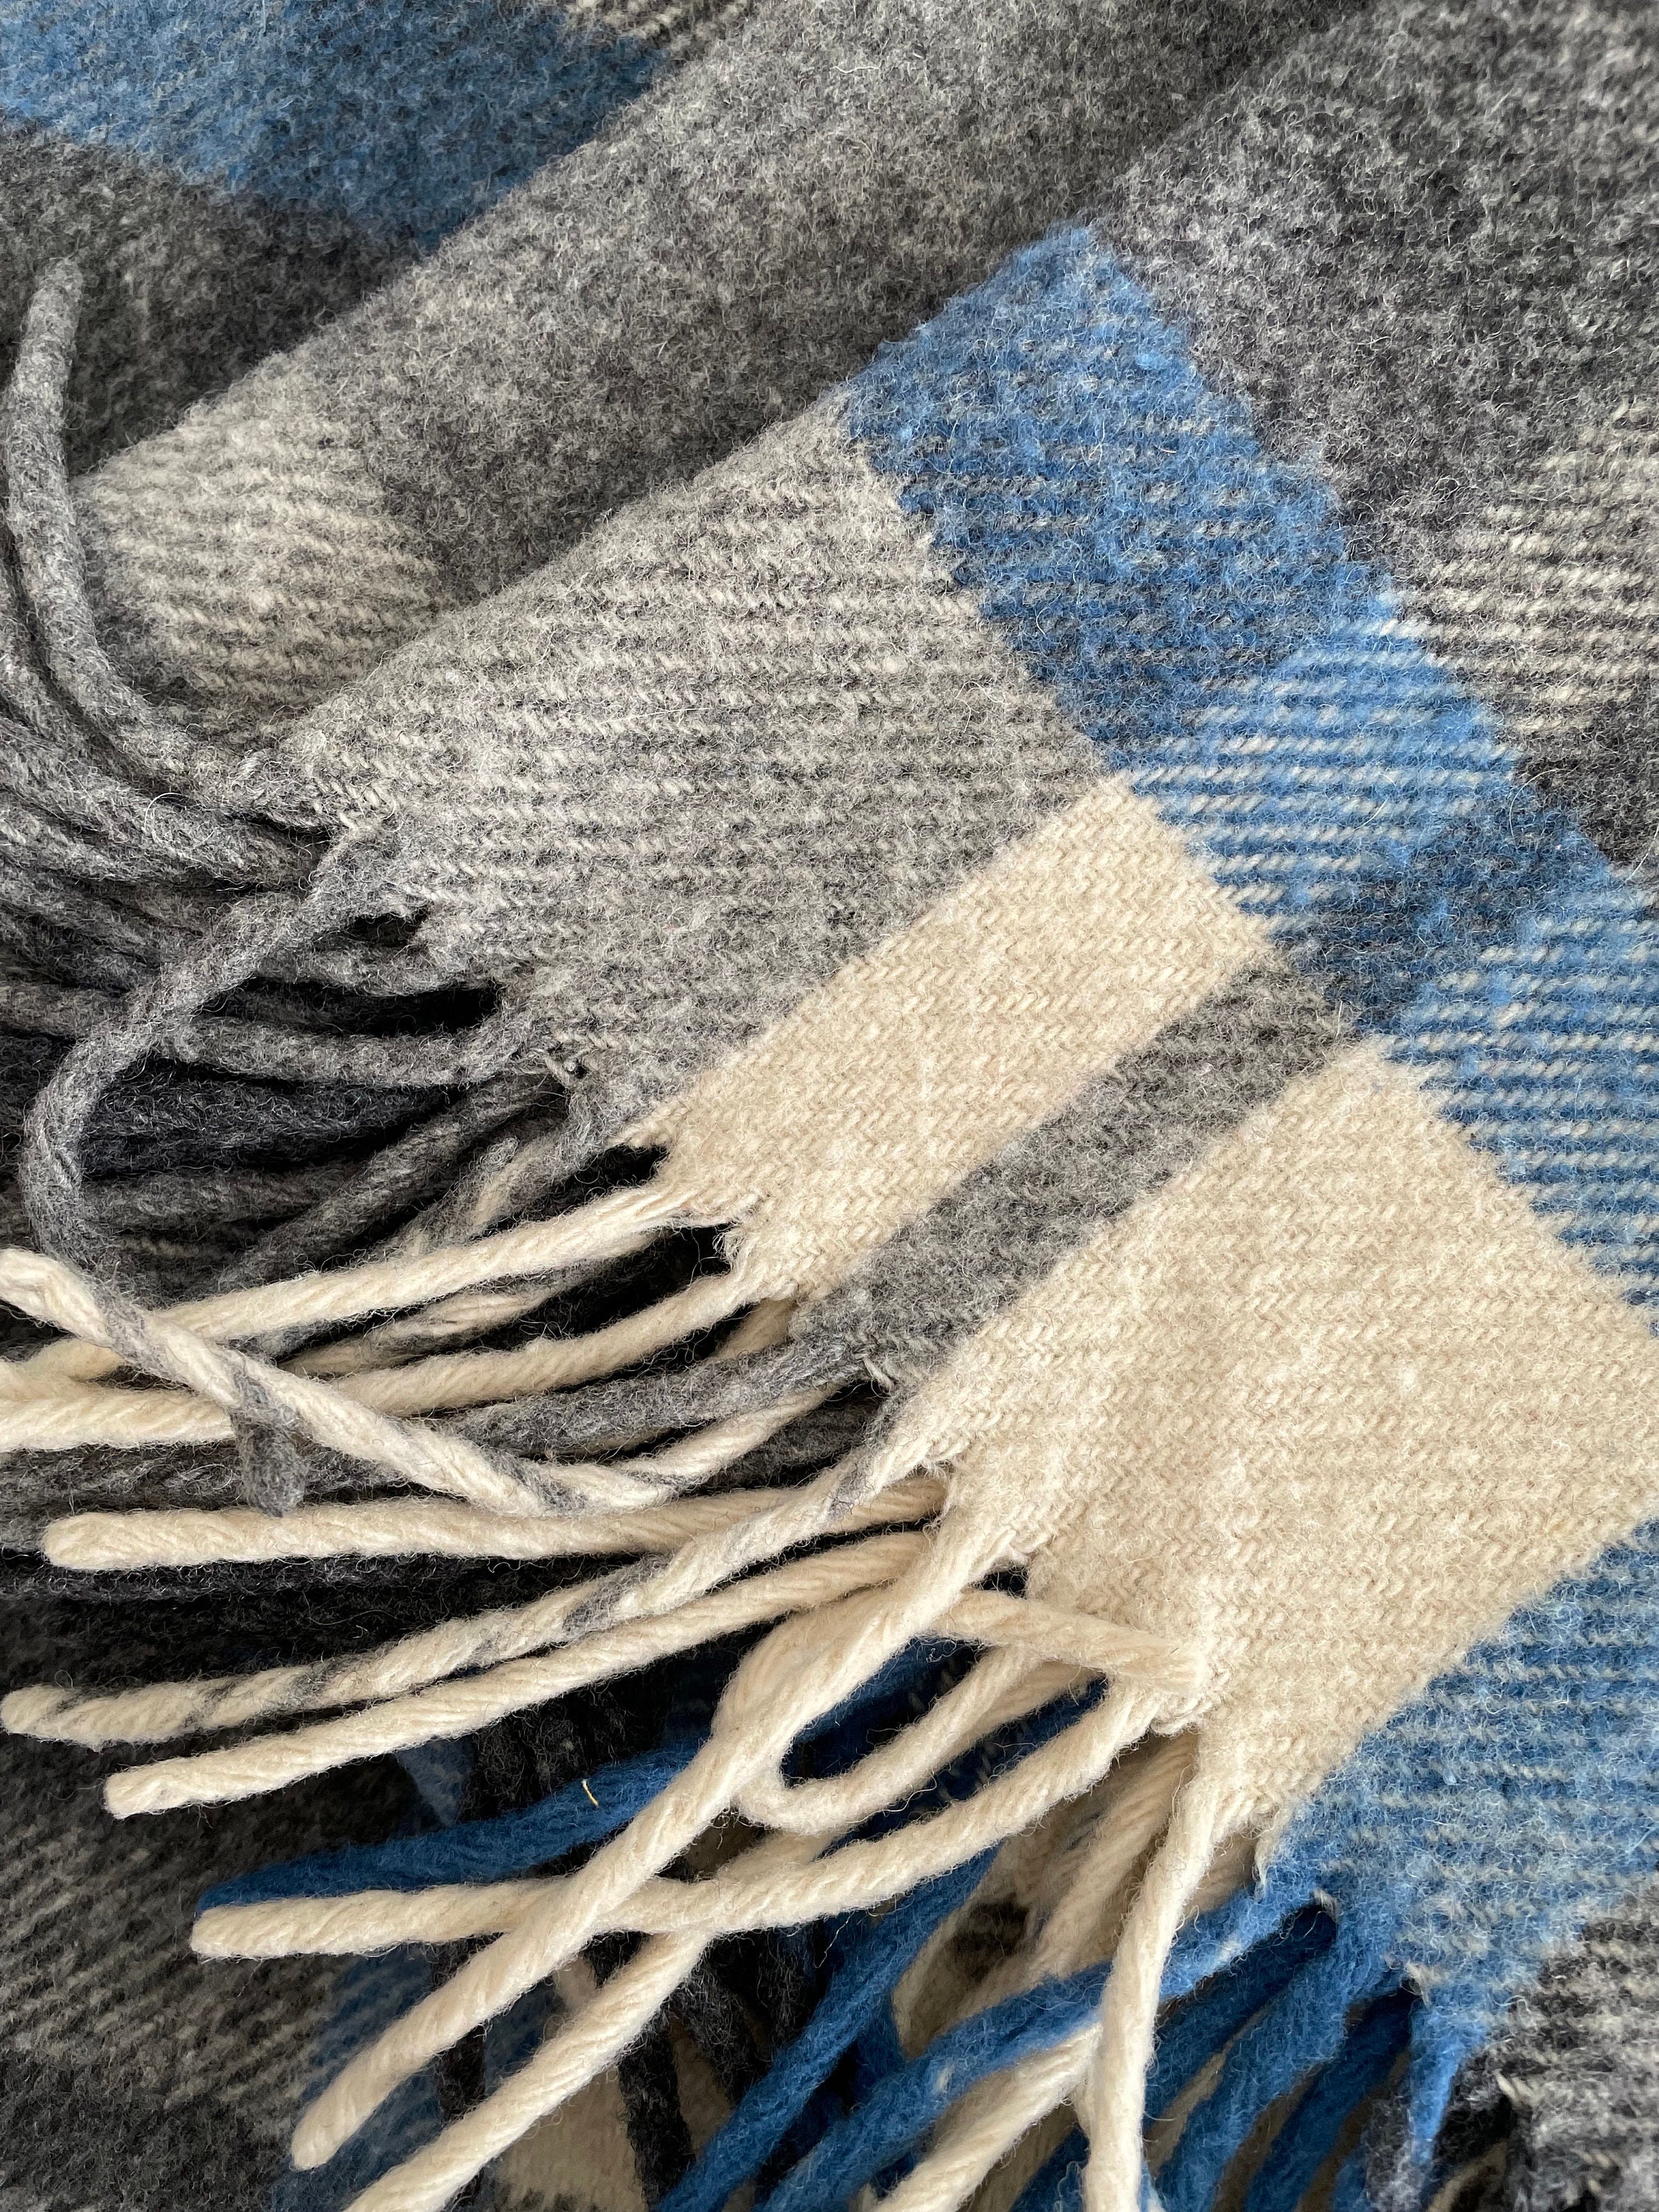 Vintage 100% Wool Blanket, Sun Products Wool Blanket, Blue and Gray ...